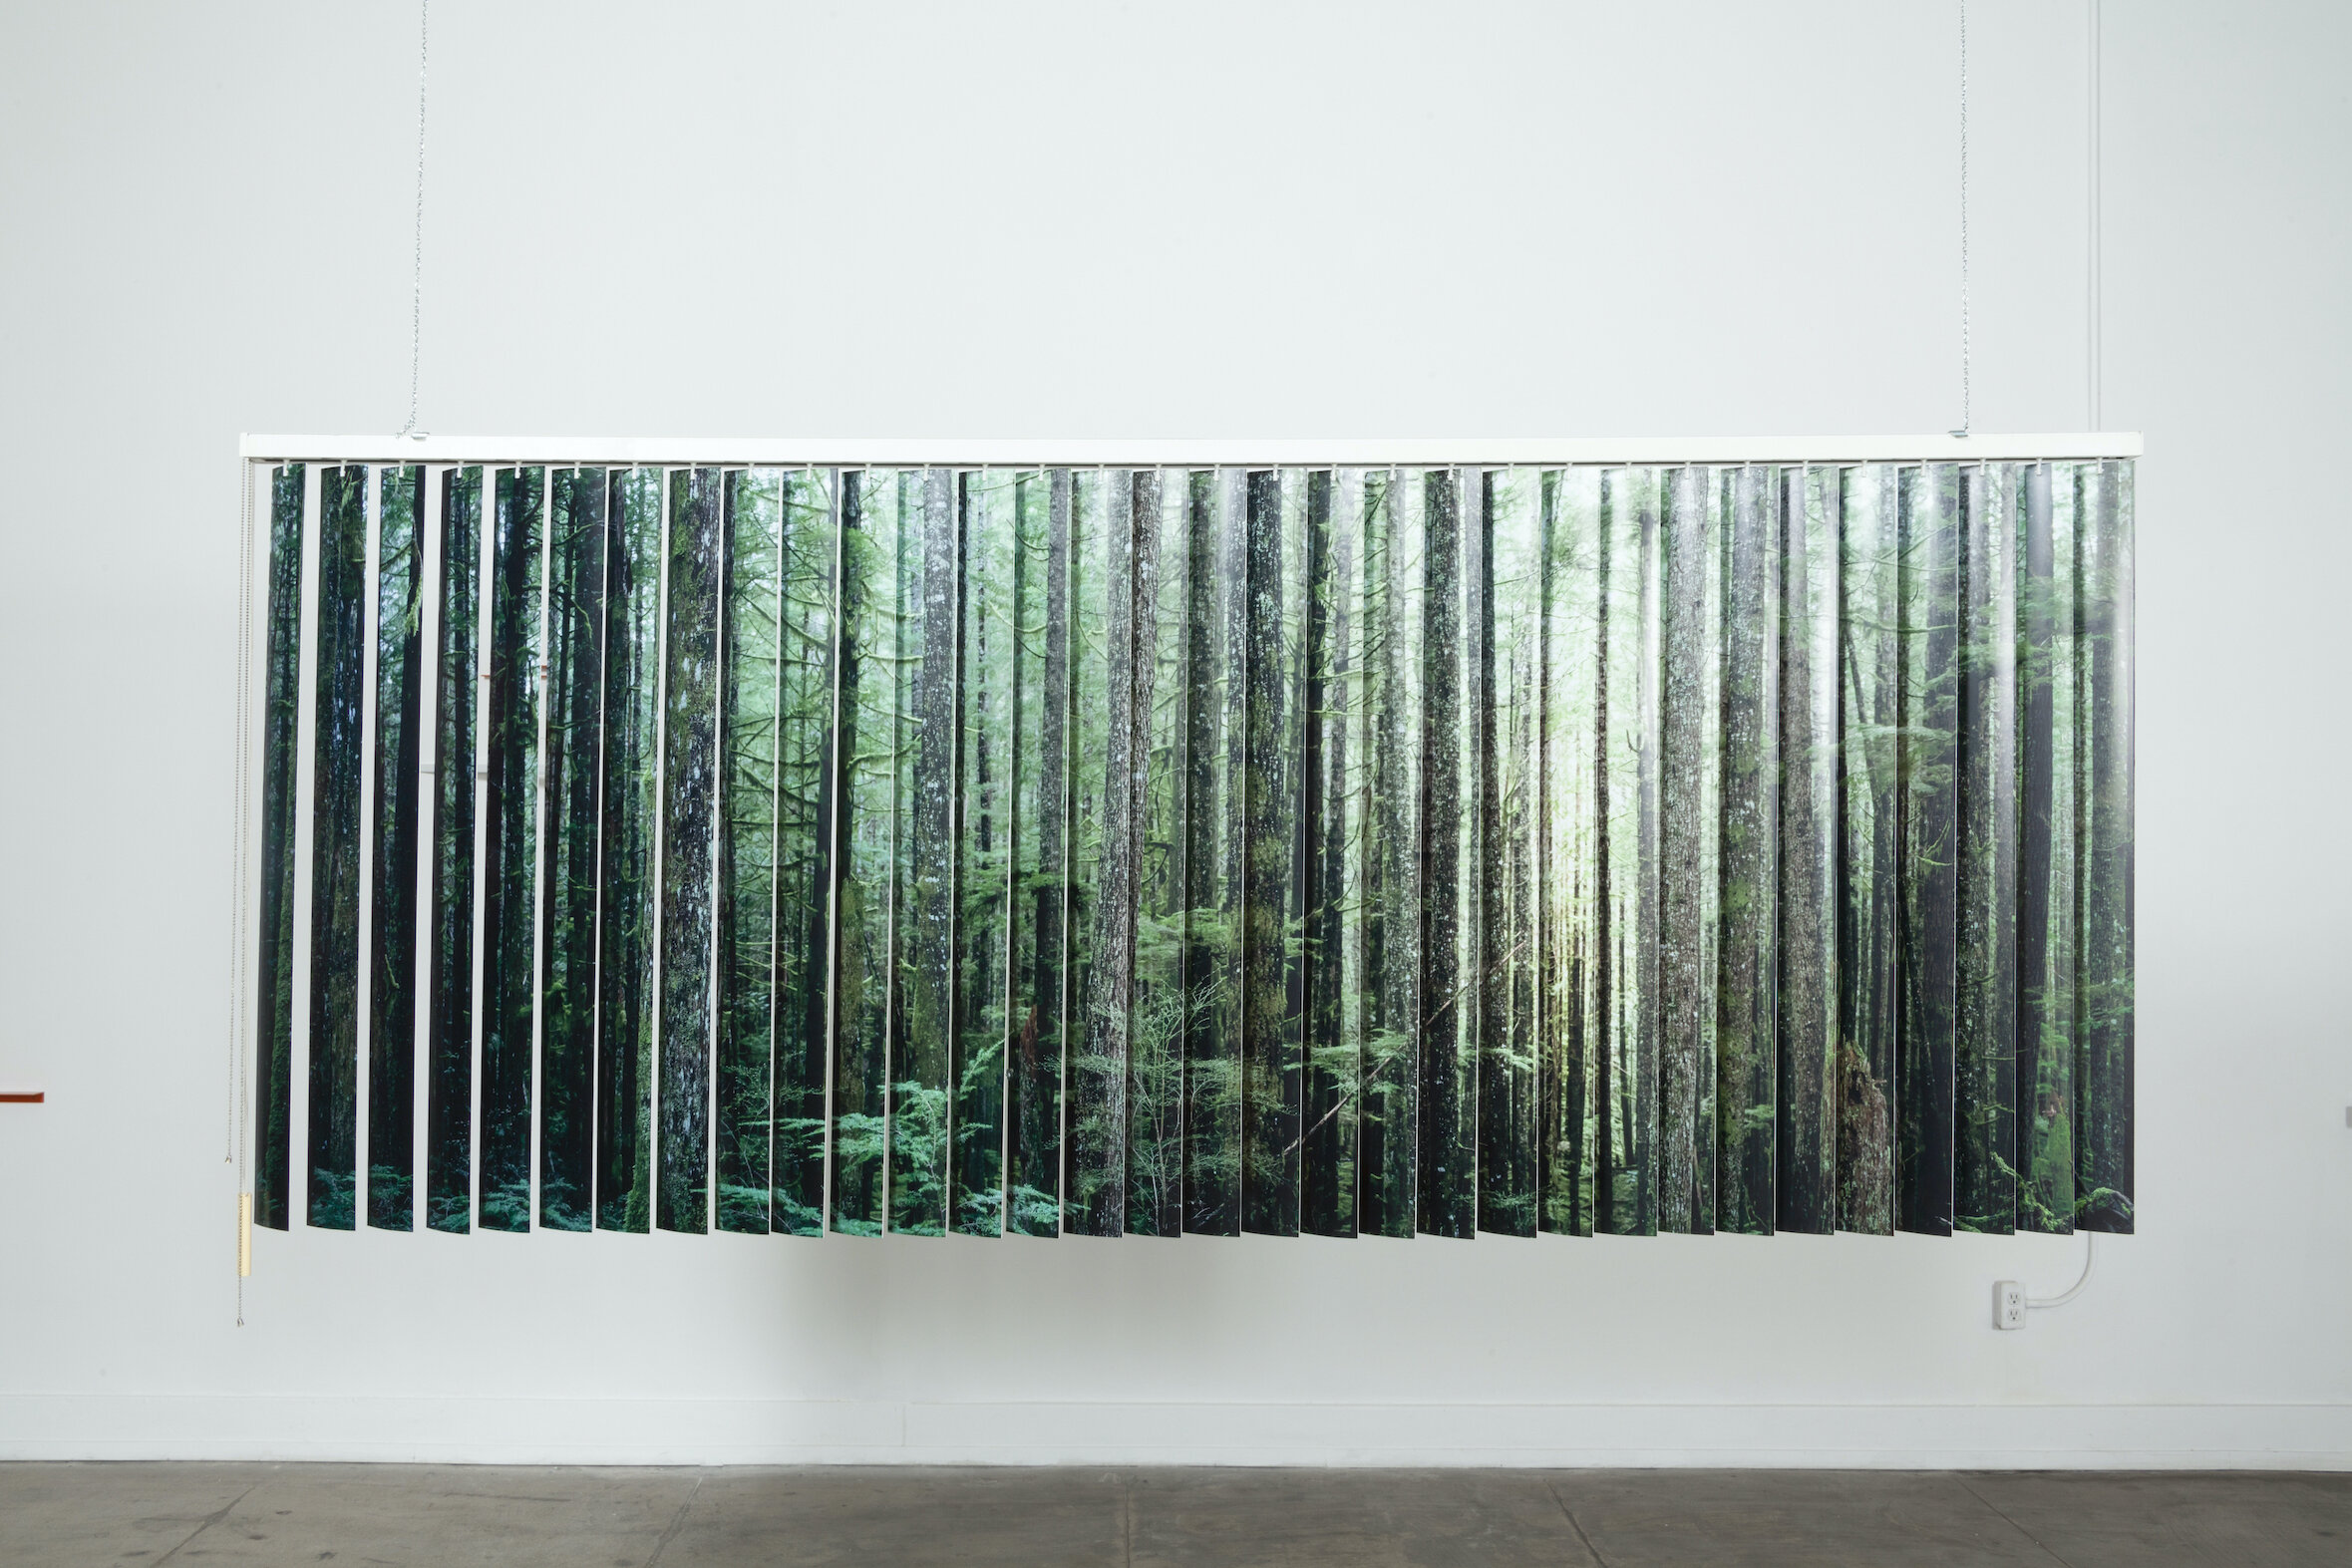   A wide and view of a dense forest in British Columbia/ Carne mista assortita,  2019, Salvaged vertical blinds, vinyl, stock photographs, 101 x 42 x 3 1⁄2 inches 